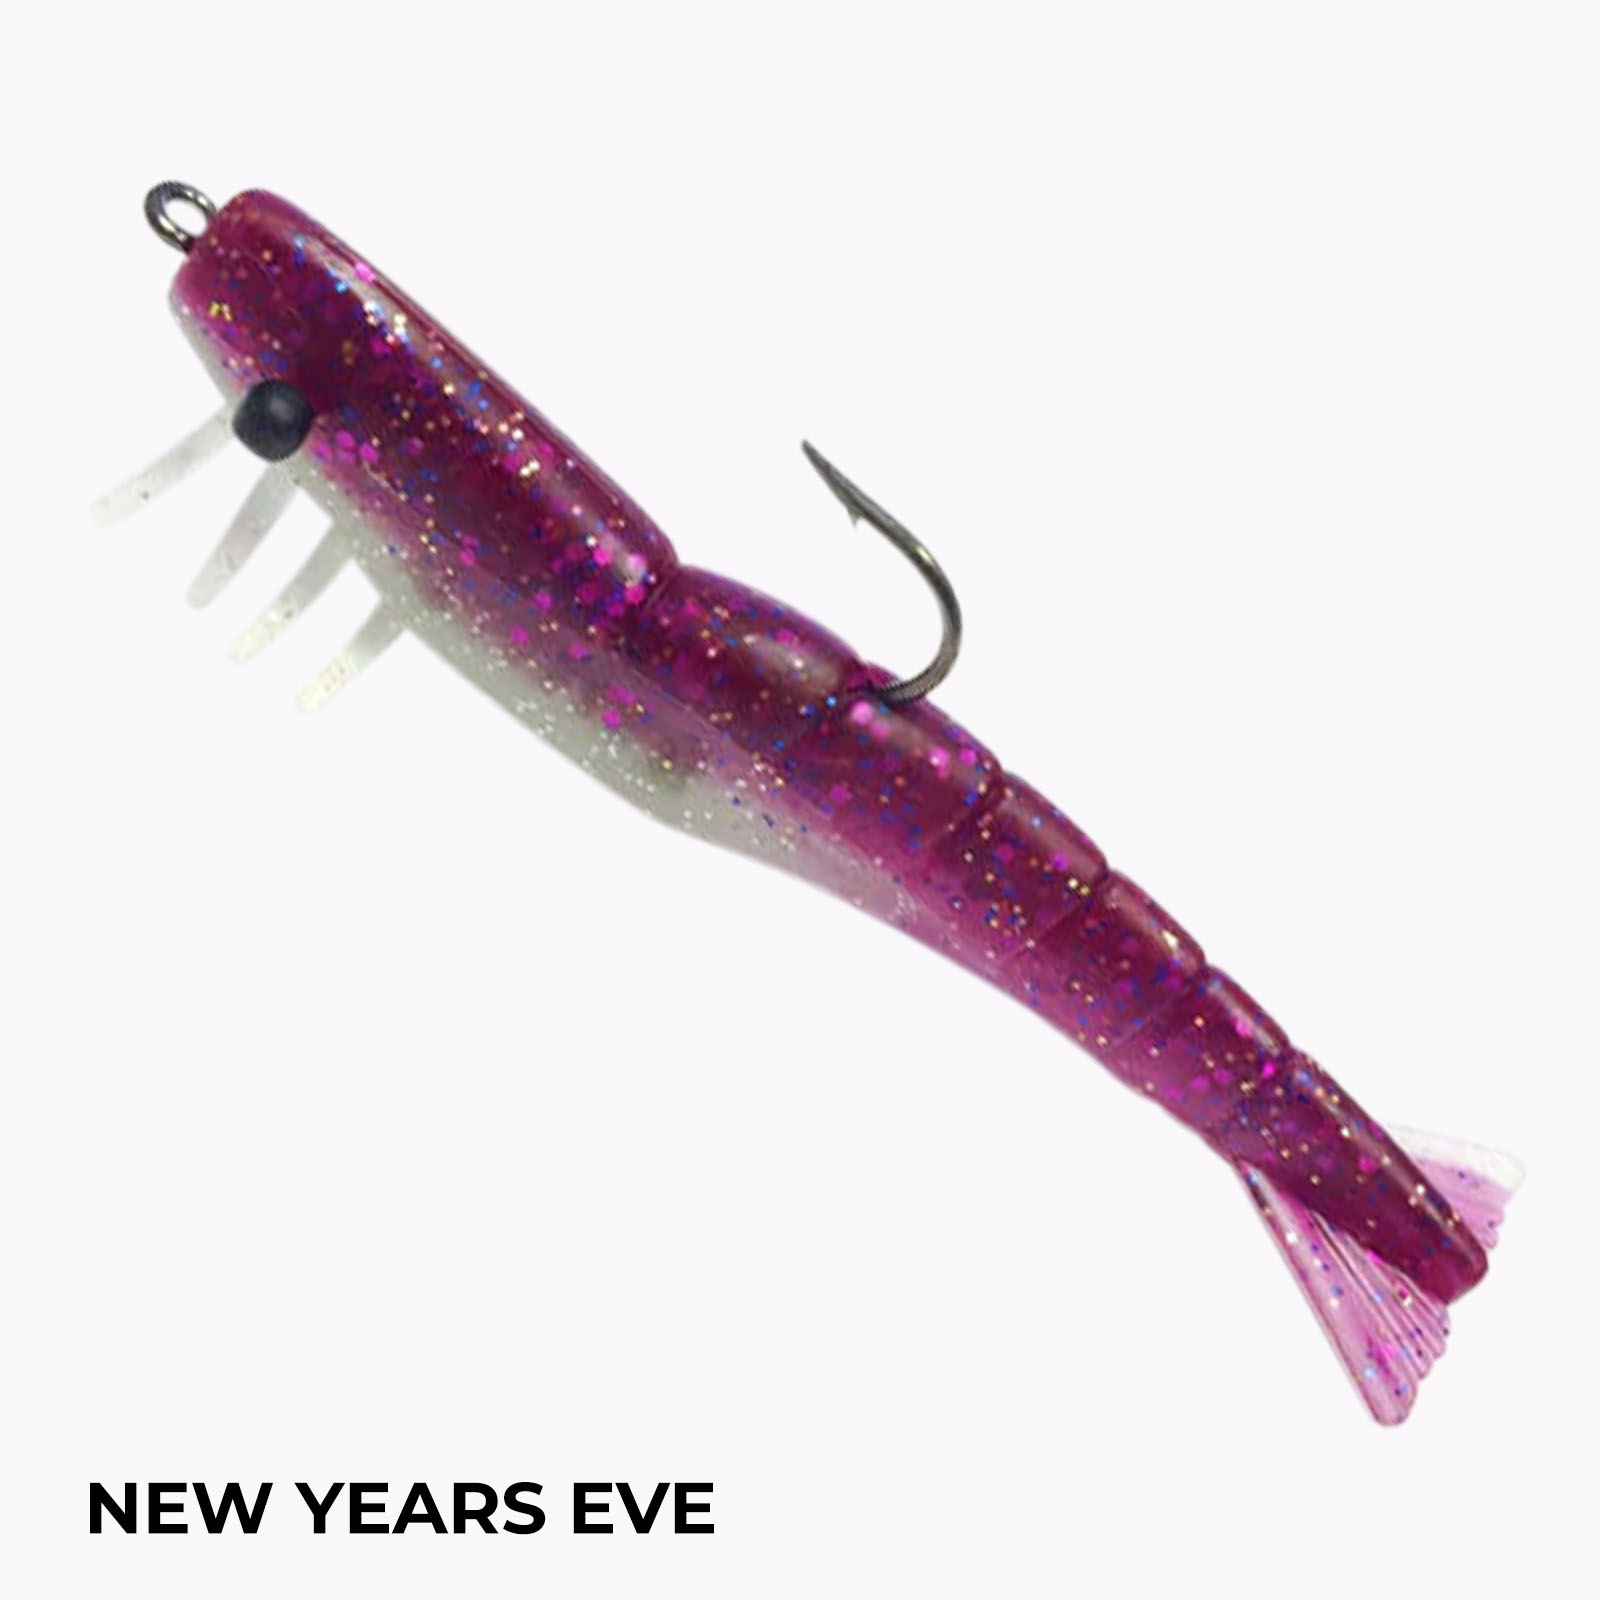  H&H TKO Shrimp Lure with Lifelike Action for Speckled